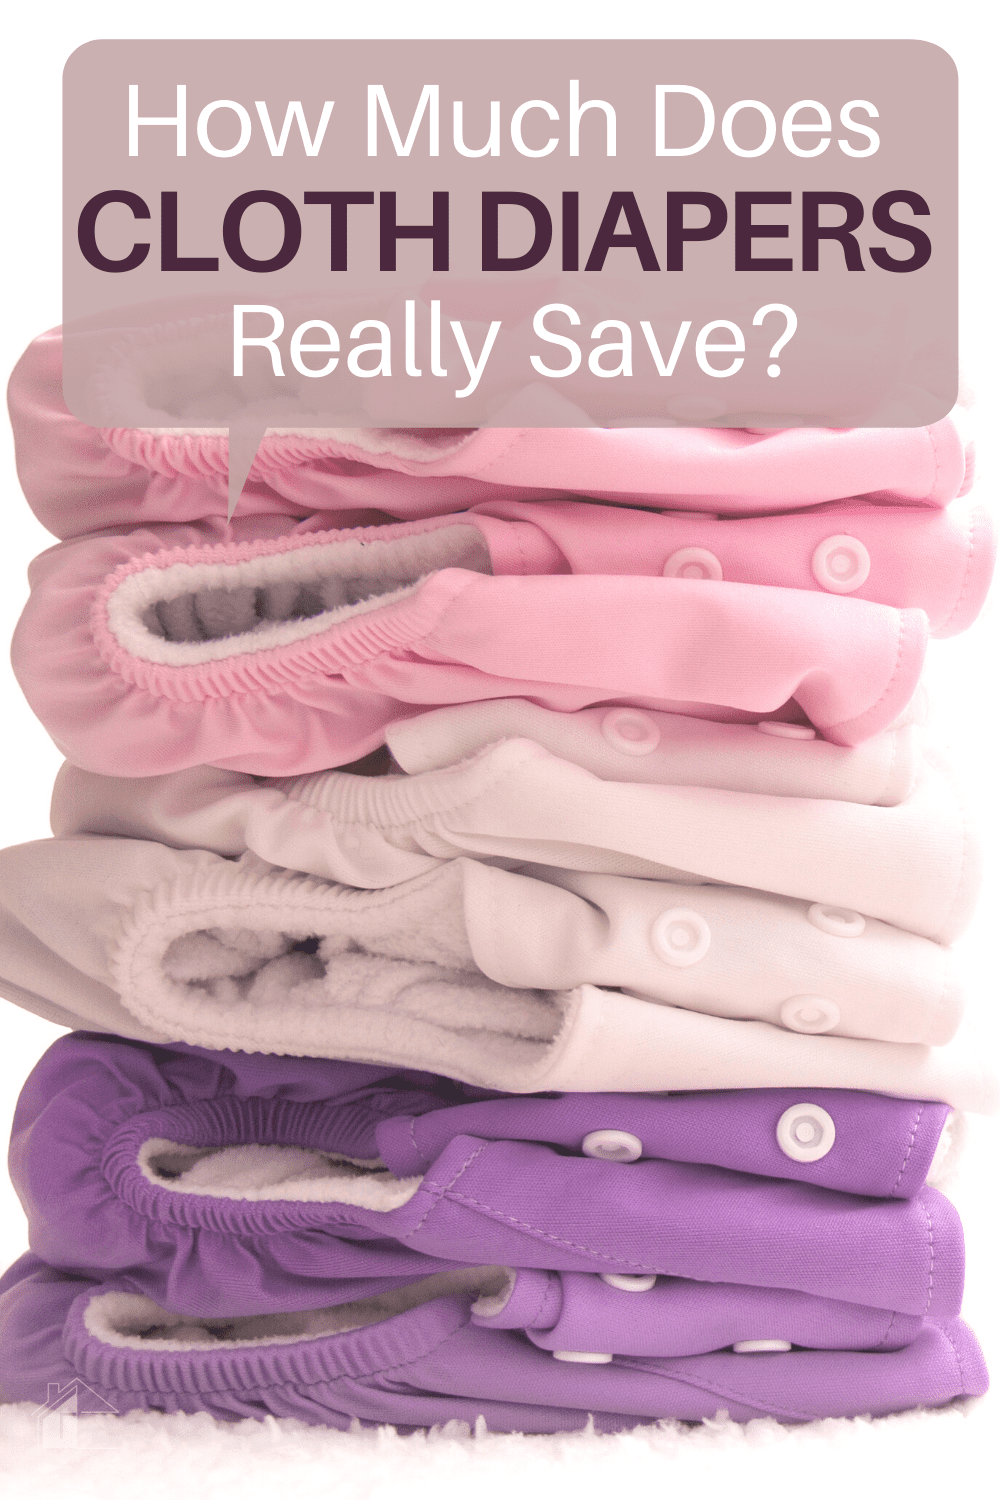 Wondering if cloth diapers are worth it? Here's a comprehensive guide to help you decide whether to make the switch! via @mystayathome